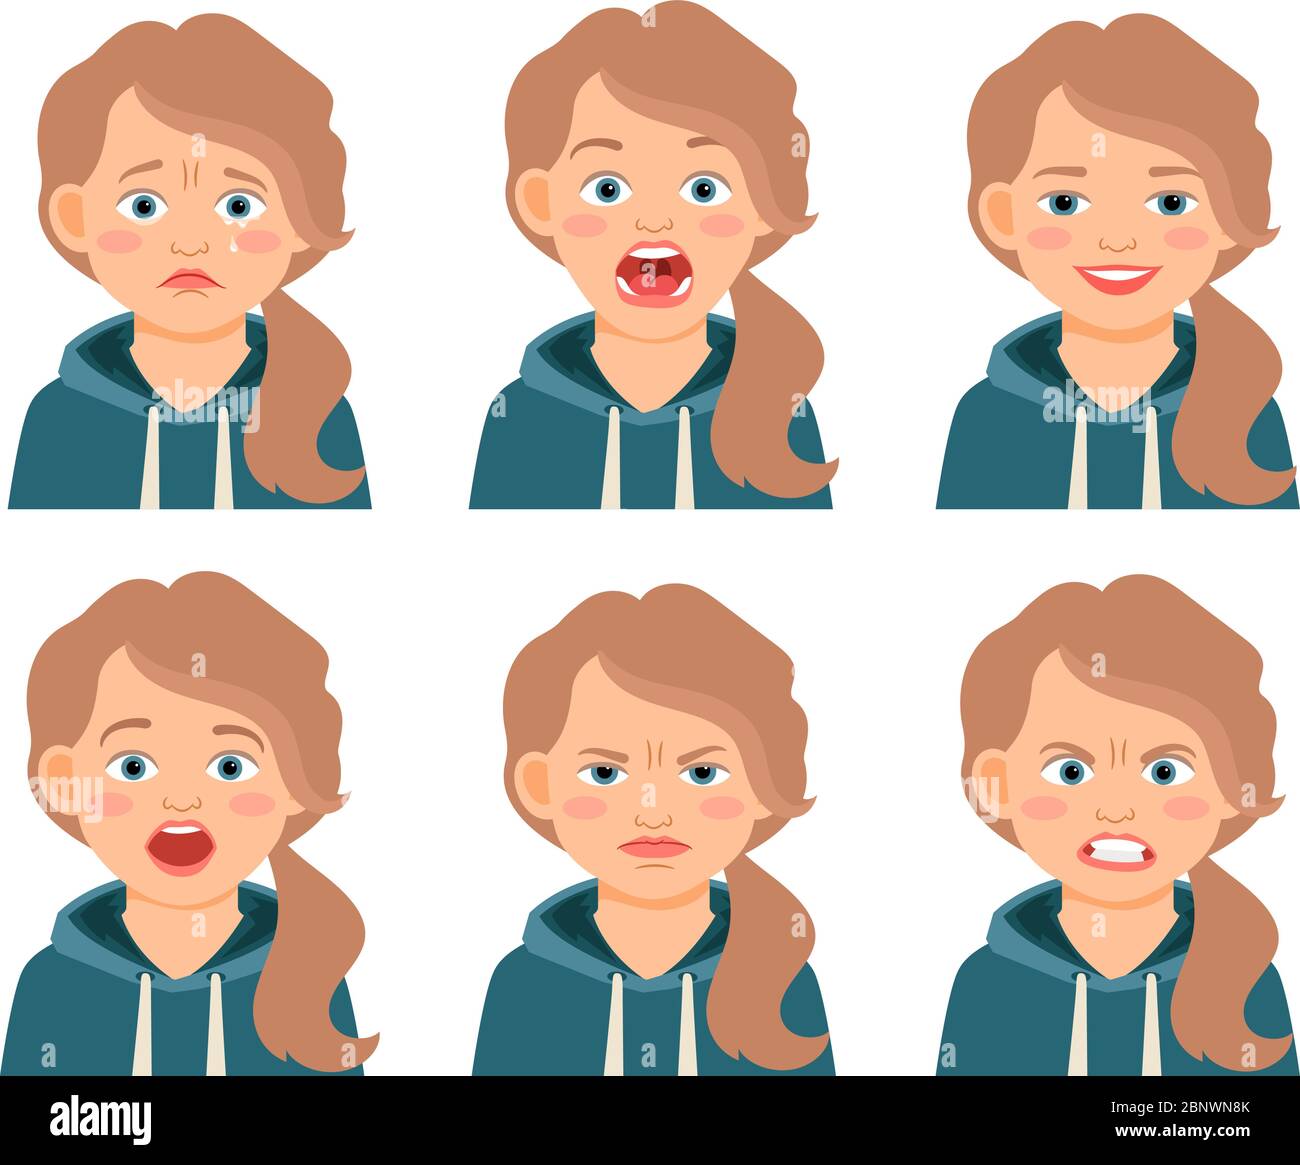 Little kid girl face expressions isolated on white background. Frowning and frightened, afraid and angry girls cartoon emotions. Vector illustration Stock Vector